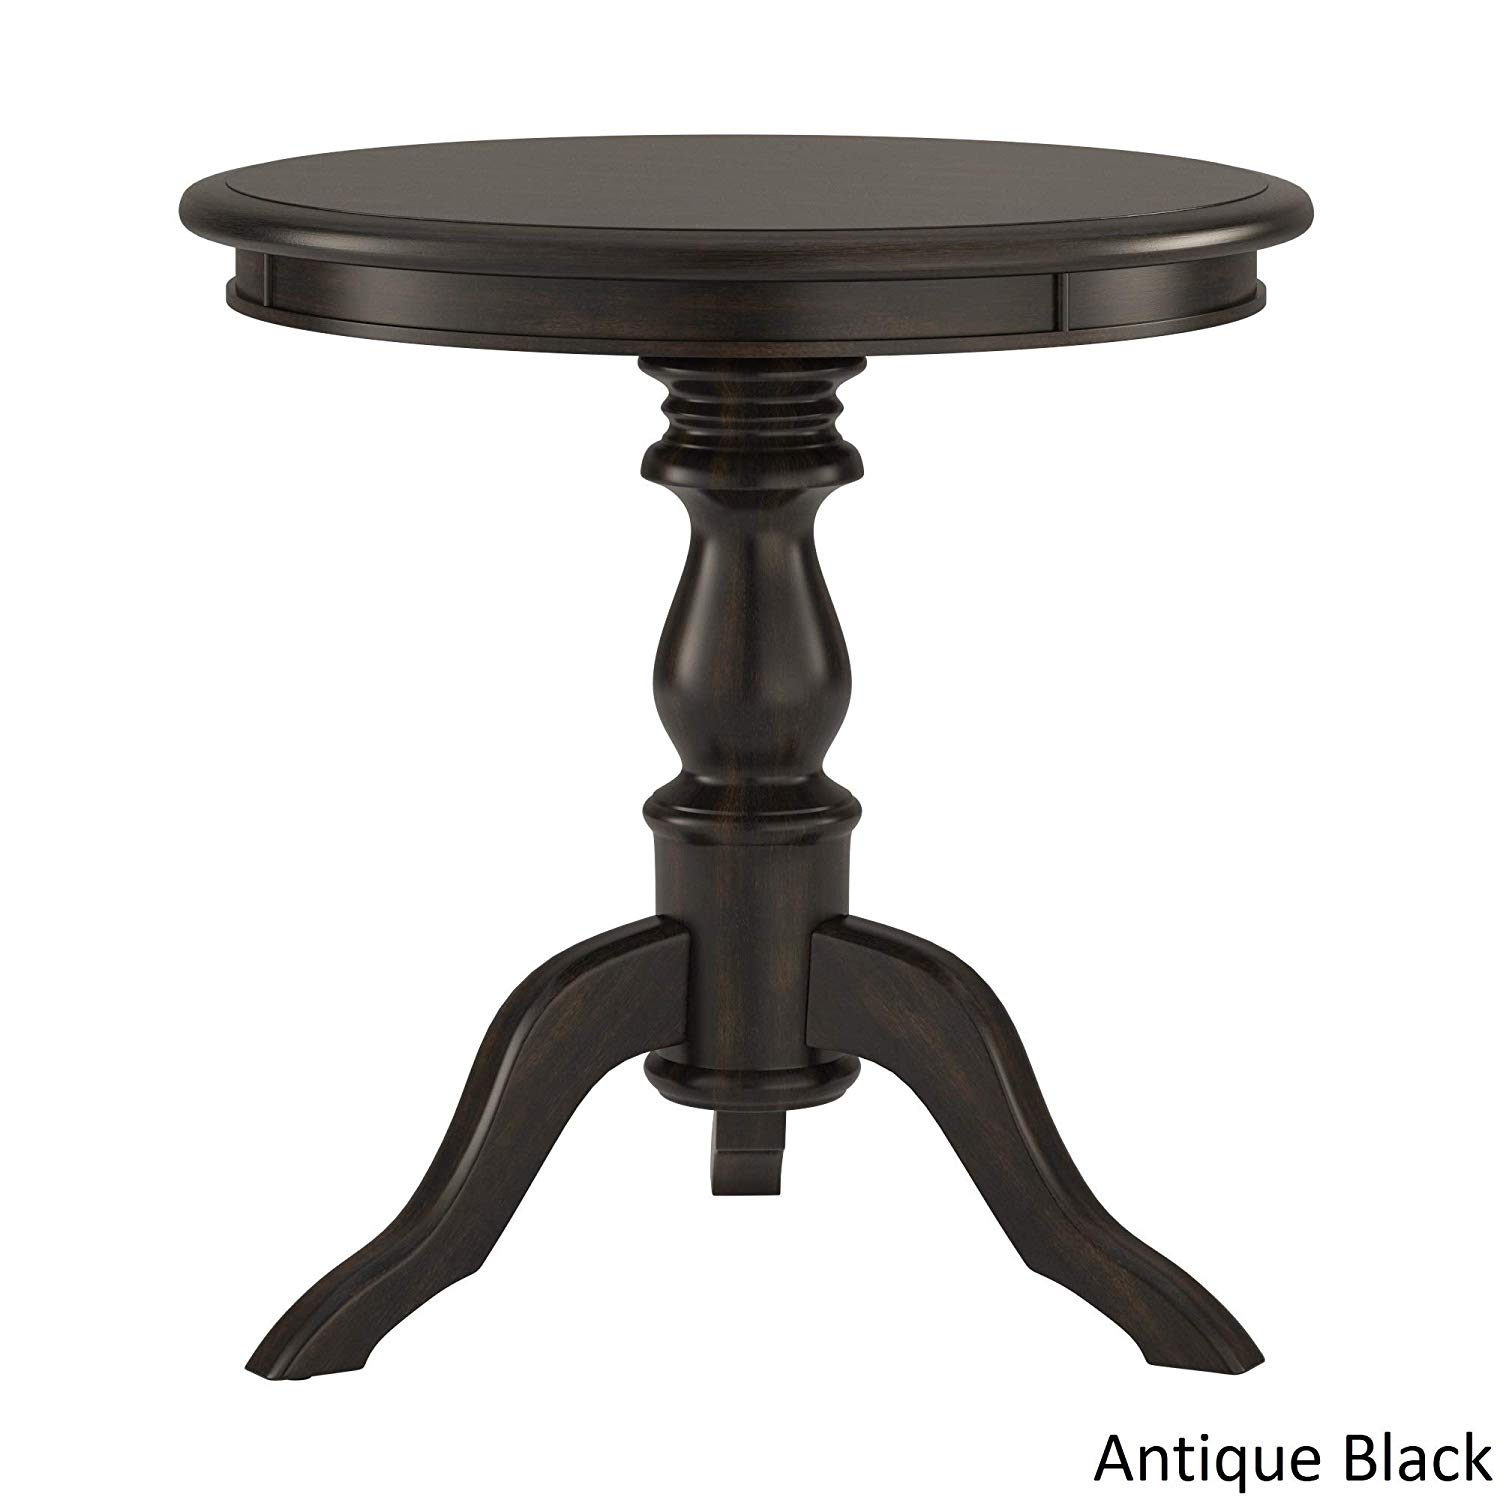 beckett antique wood pedestal accent table inspire white classic black kitchen dining coca cola tiffany lamp tall slim small half round console qvc furniture all marble inch